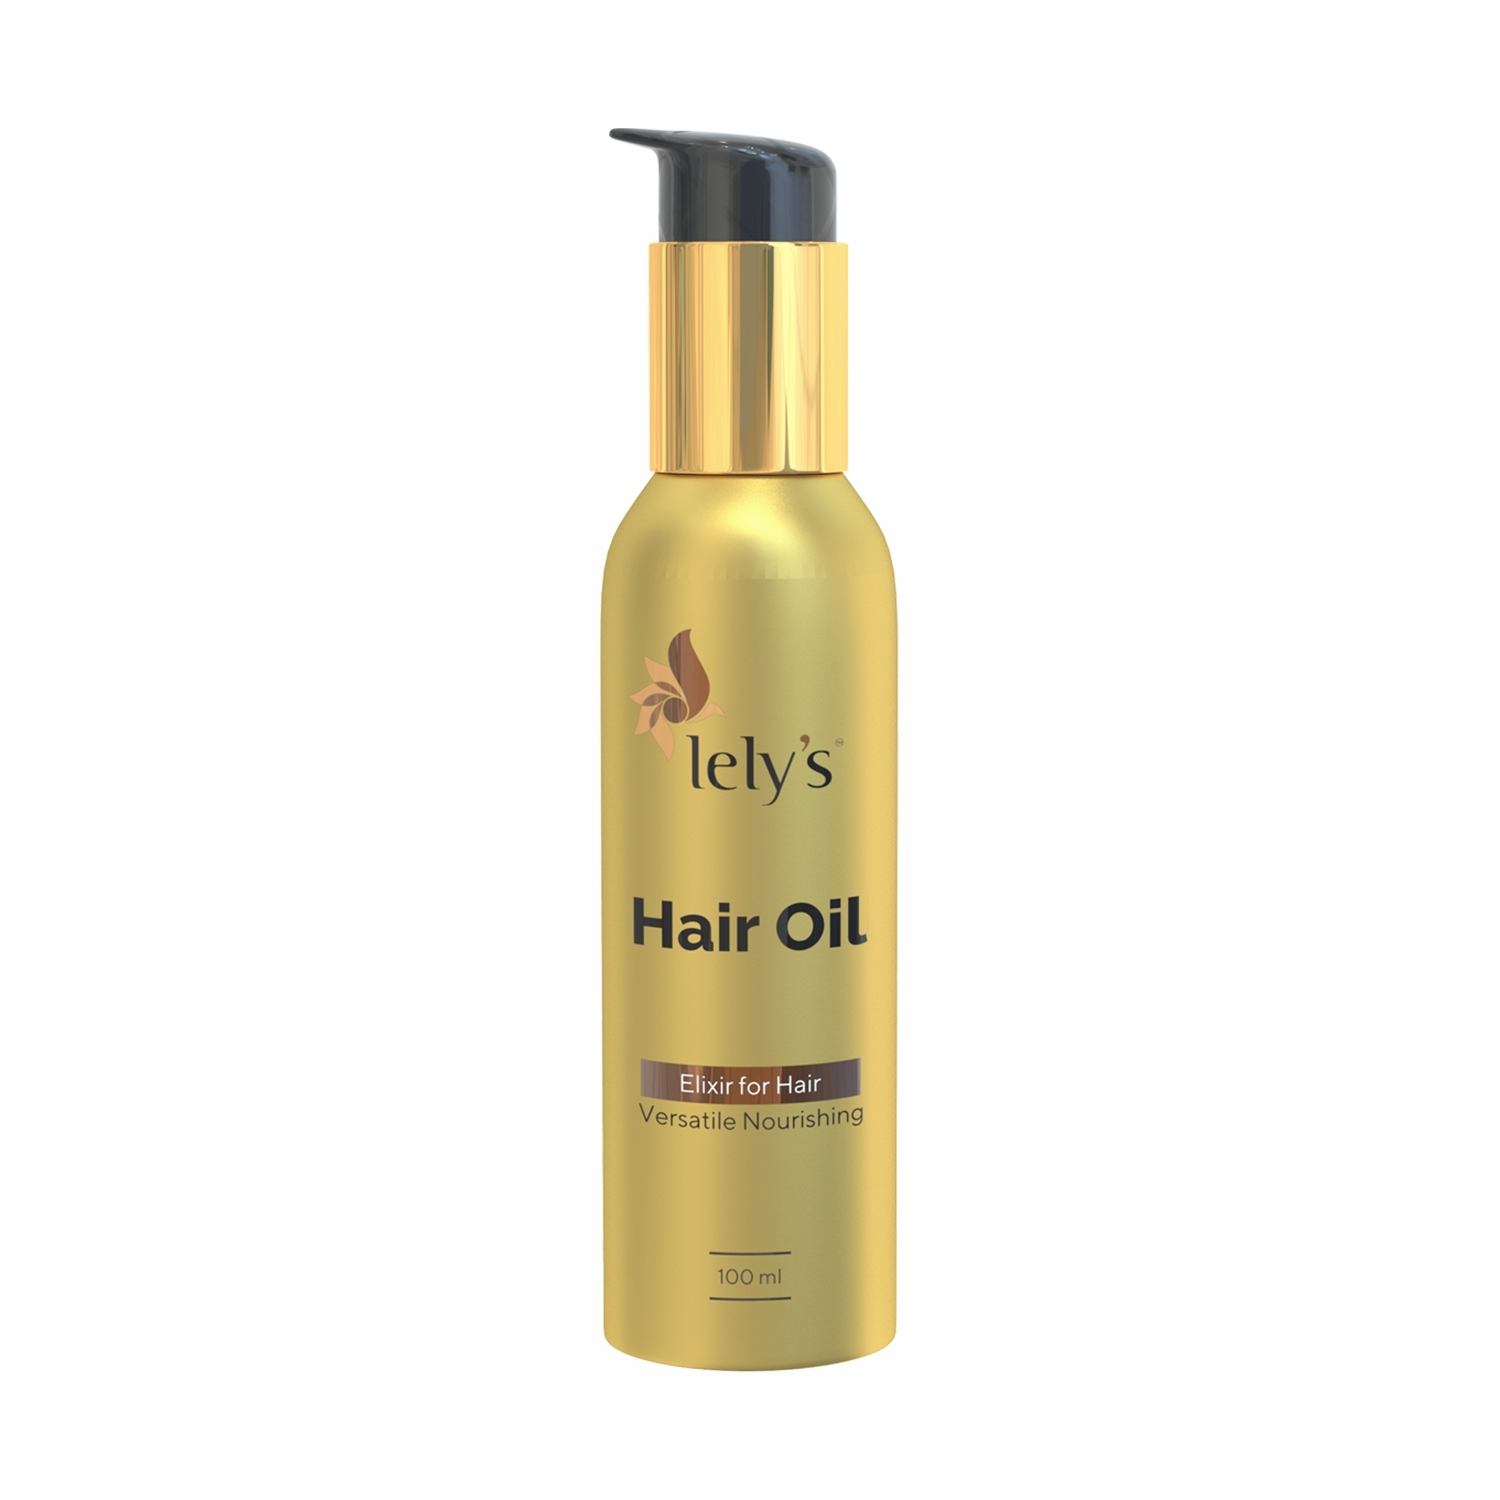 lely's | Lely’s Hair Oil For Hair Growth - Transforms Dry-Brittle Hair Into Silky, Reduces Hair Fall, Shiny And Smooth Hair, Soft And Firm Hair, Repairs Split Ends, Control Hair Damage - 100 Ml 0